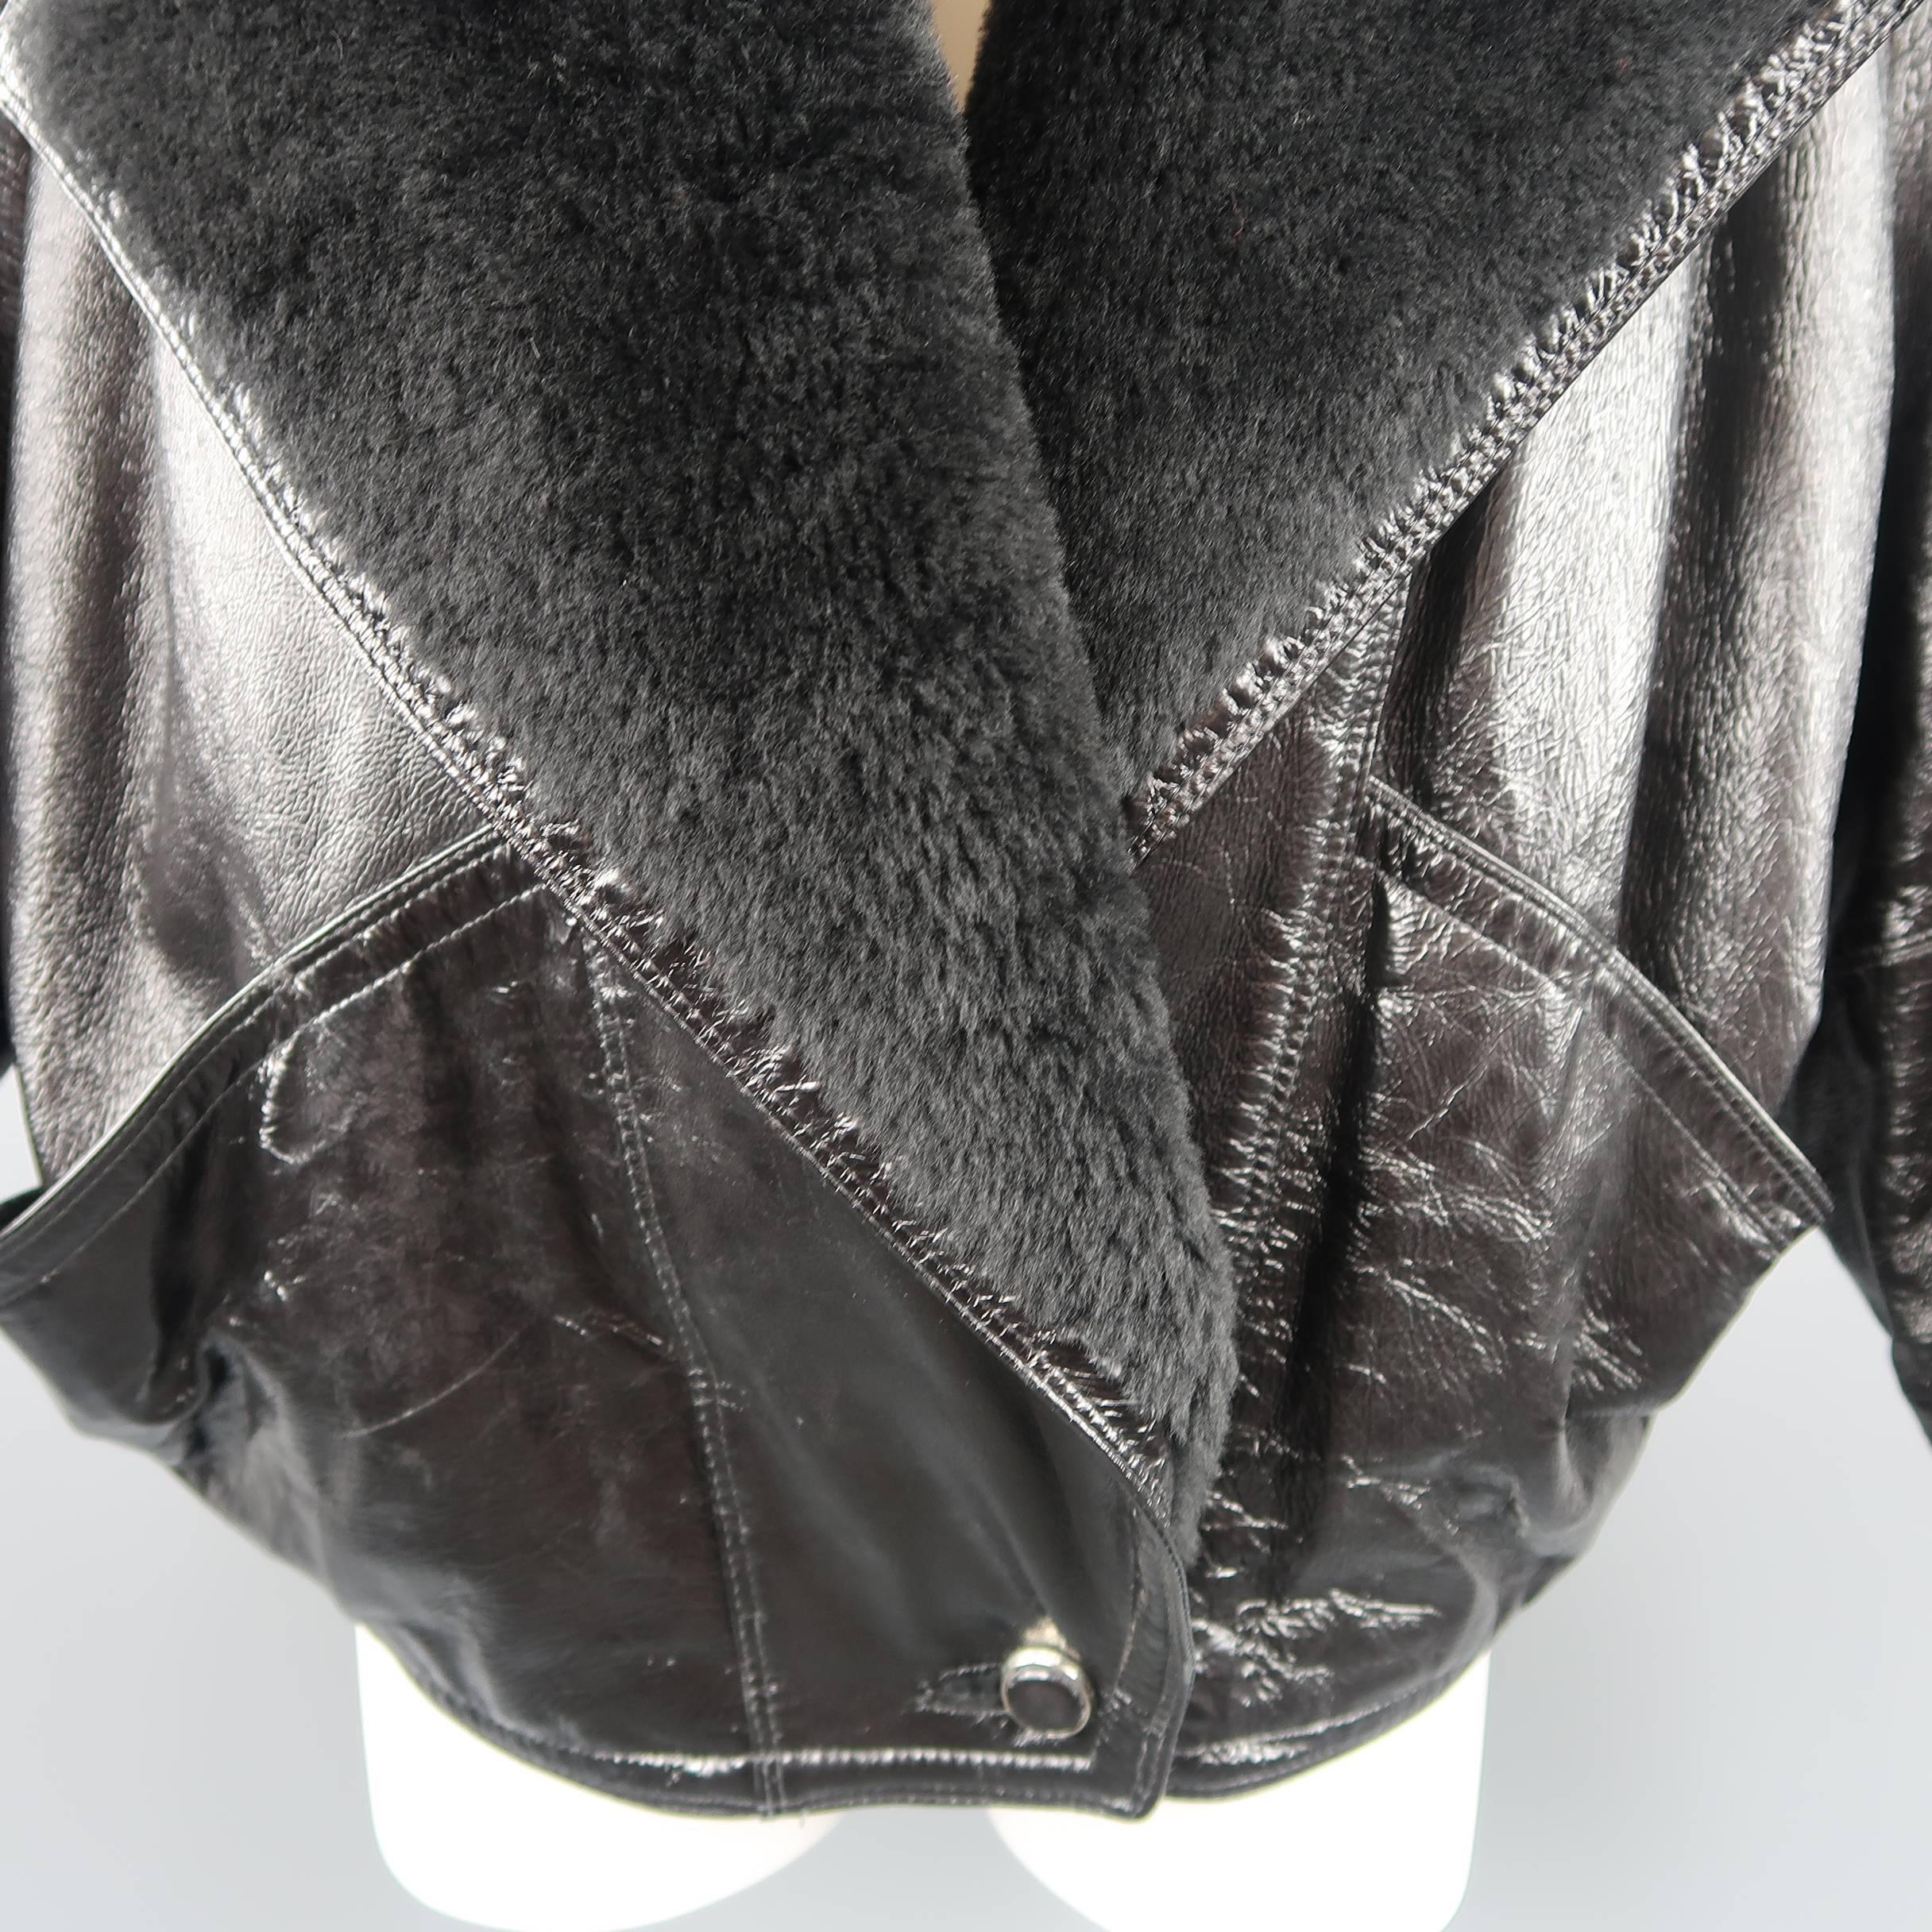 Vintage 1980's GIANNI VERSACE jacket comes in black textured patent leather with a large, shearling fur pointed lapel, oversized silhouette, single button, double breasted closure, batwing raglan sleeves, and slit pockets. Made in Italy.
 
Good